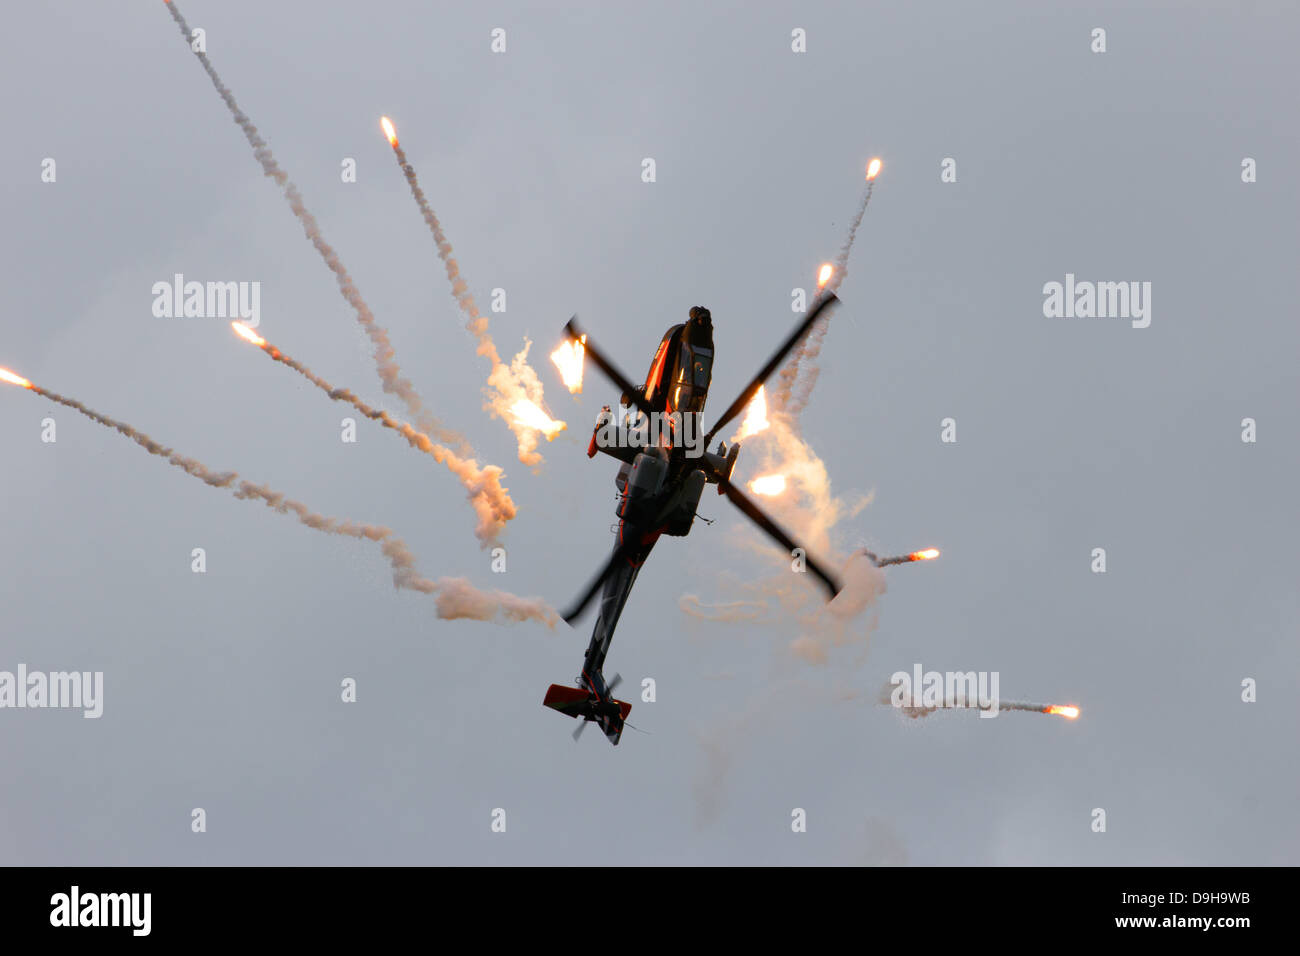 AH-64 Apache attack helicopter firing flares Stock Photo